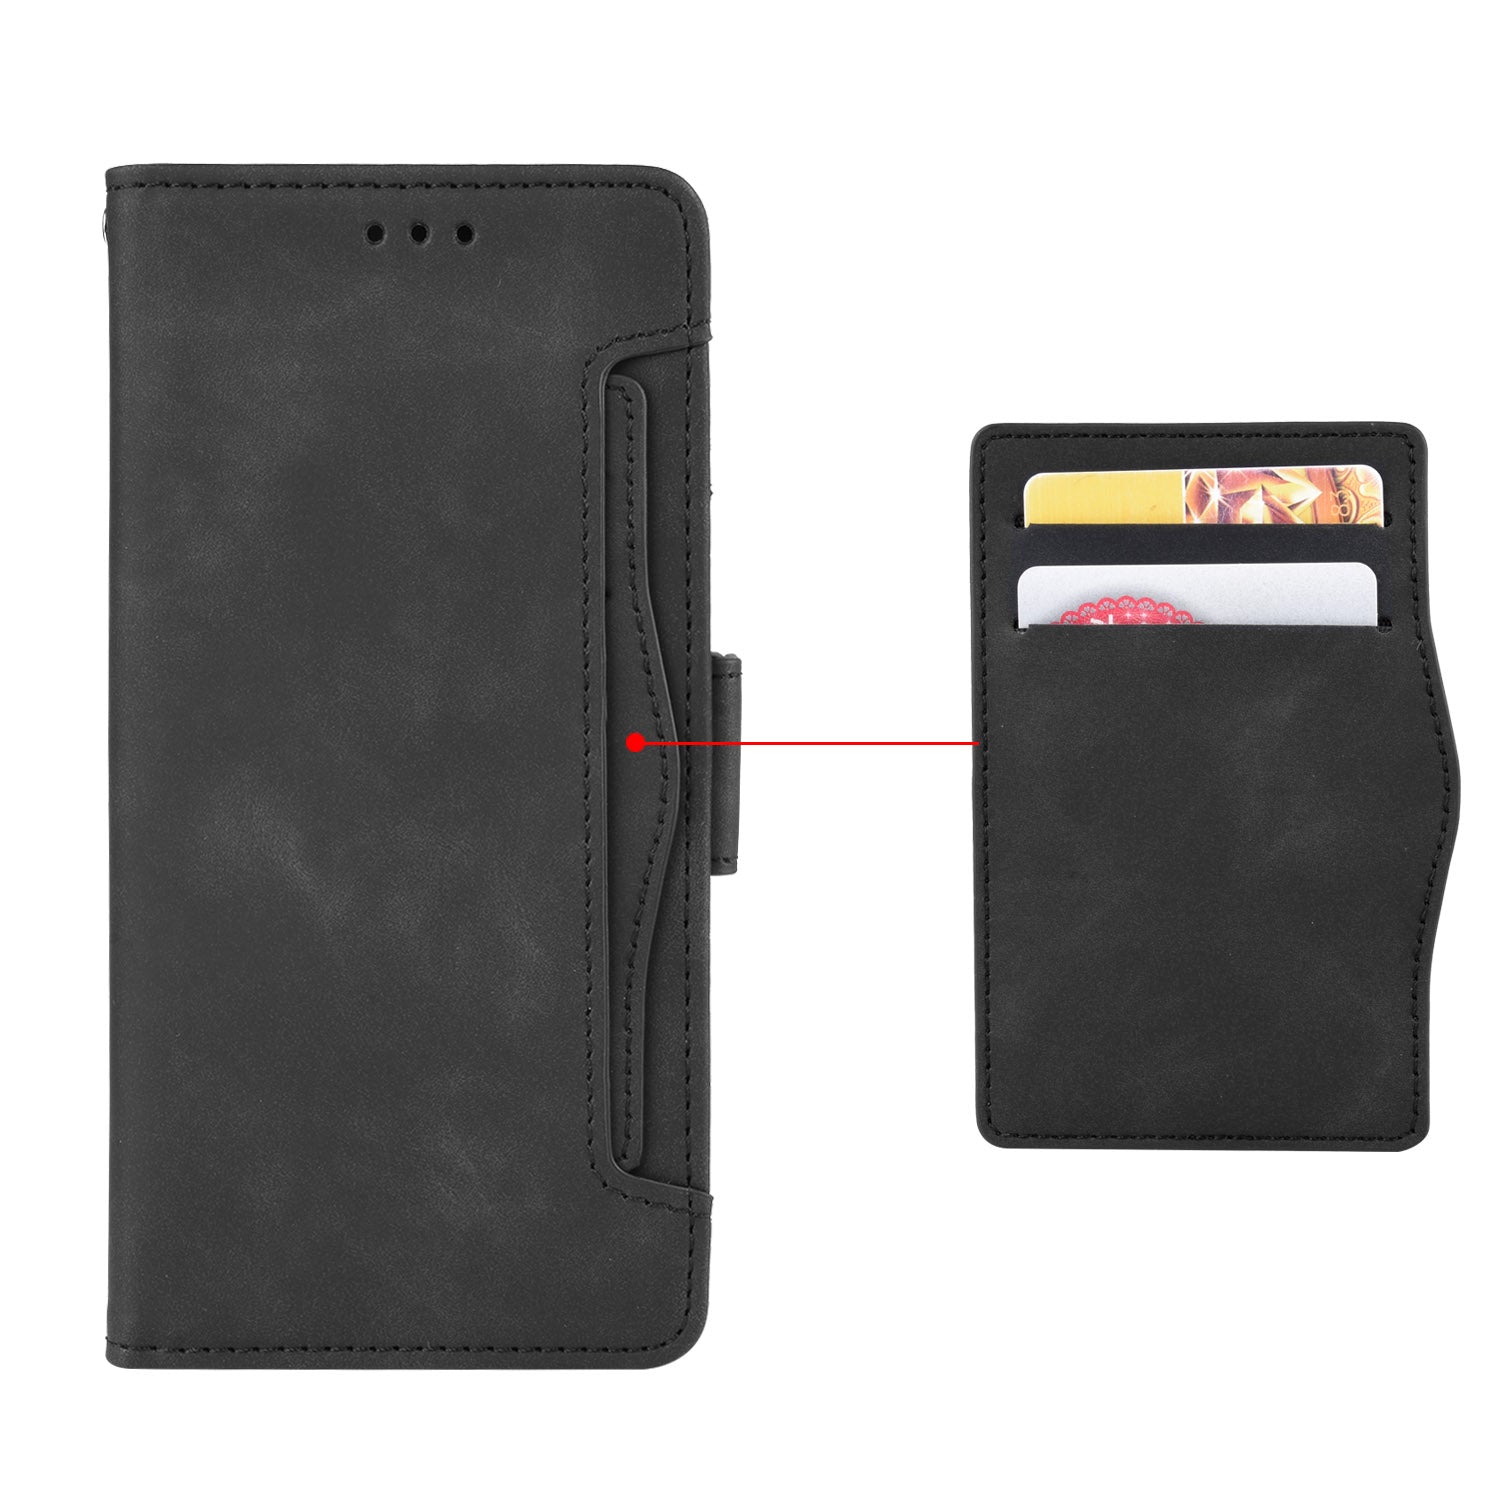 For Huawei Pura 70 Leather Case Multiple Card Slots Mobile Phone Cover Wholesale - Black